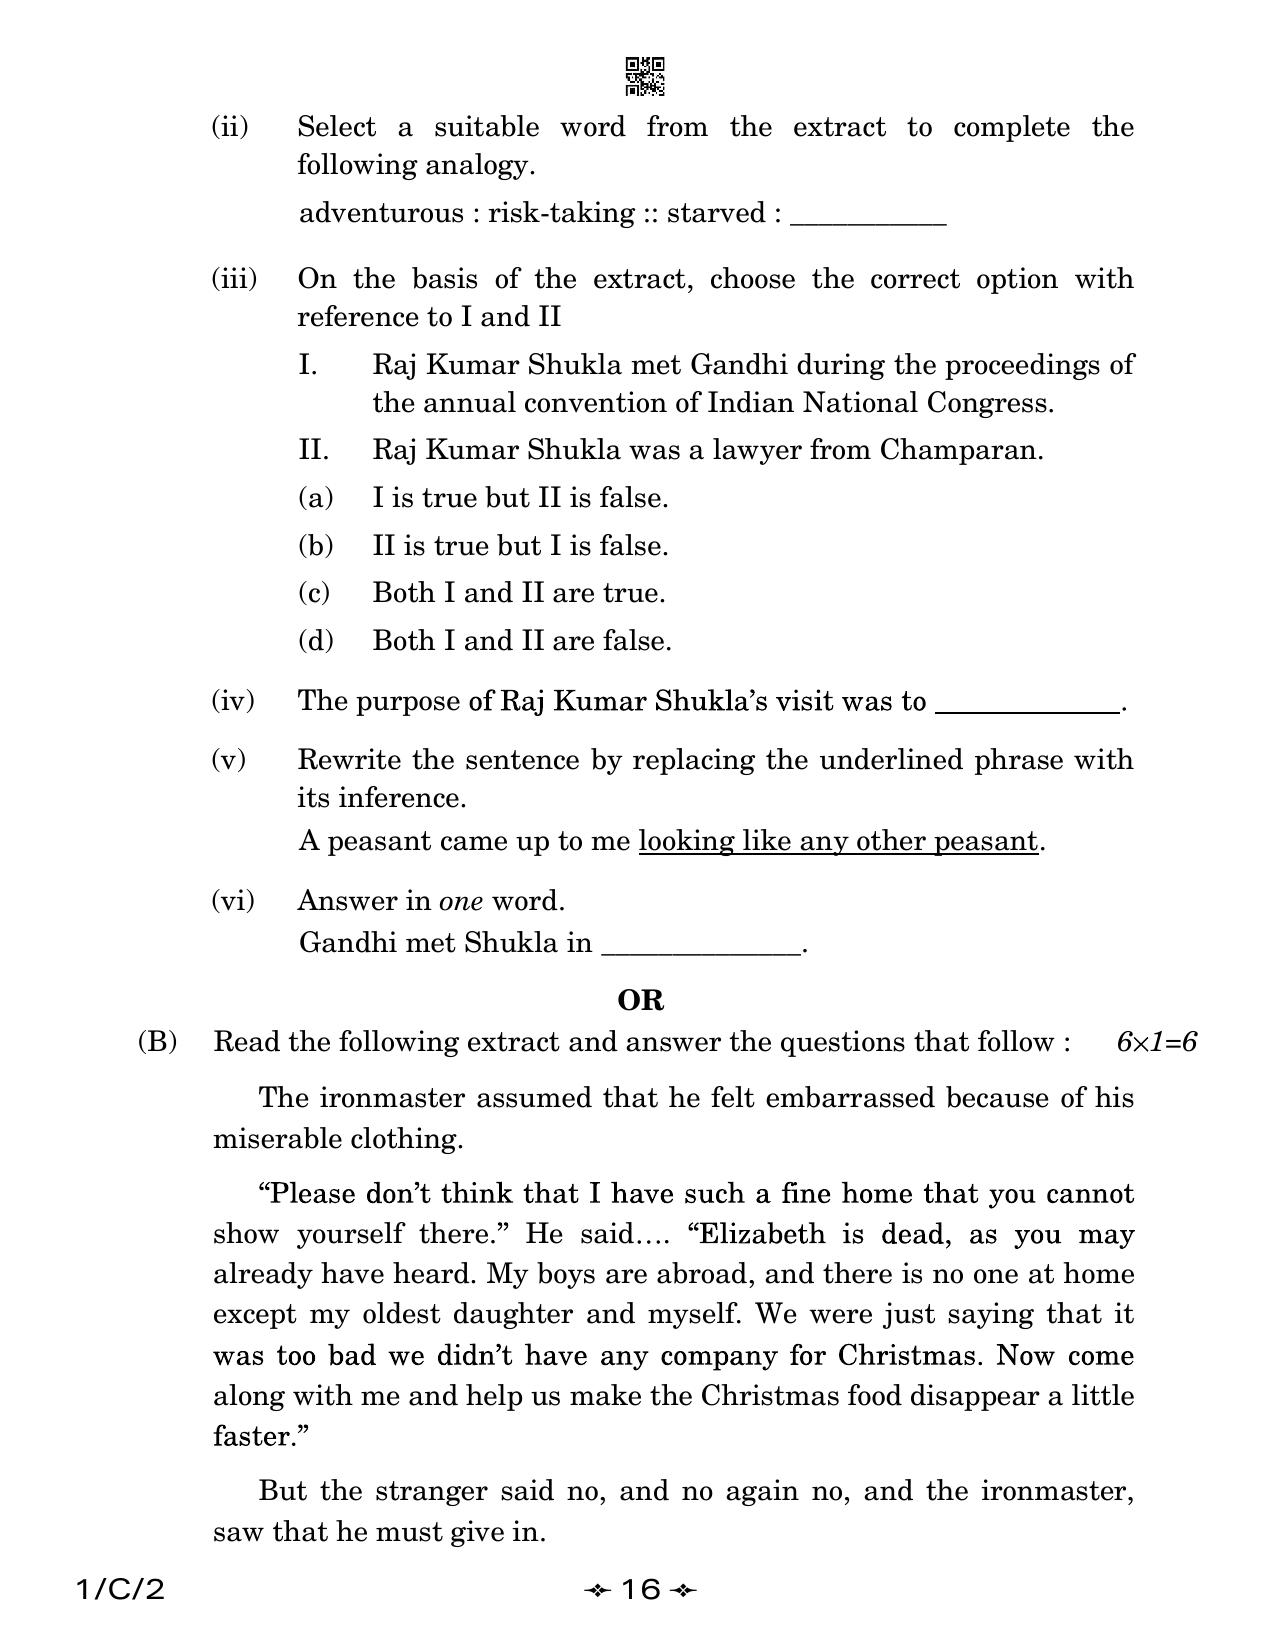 CBSE Class 12 1-2 English Core 2023 (Compartment) Question Paper - Page 16